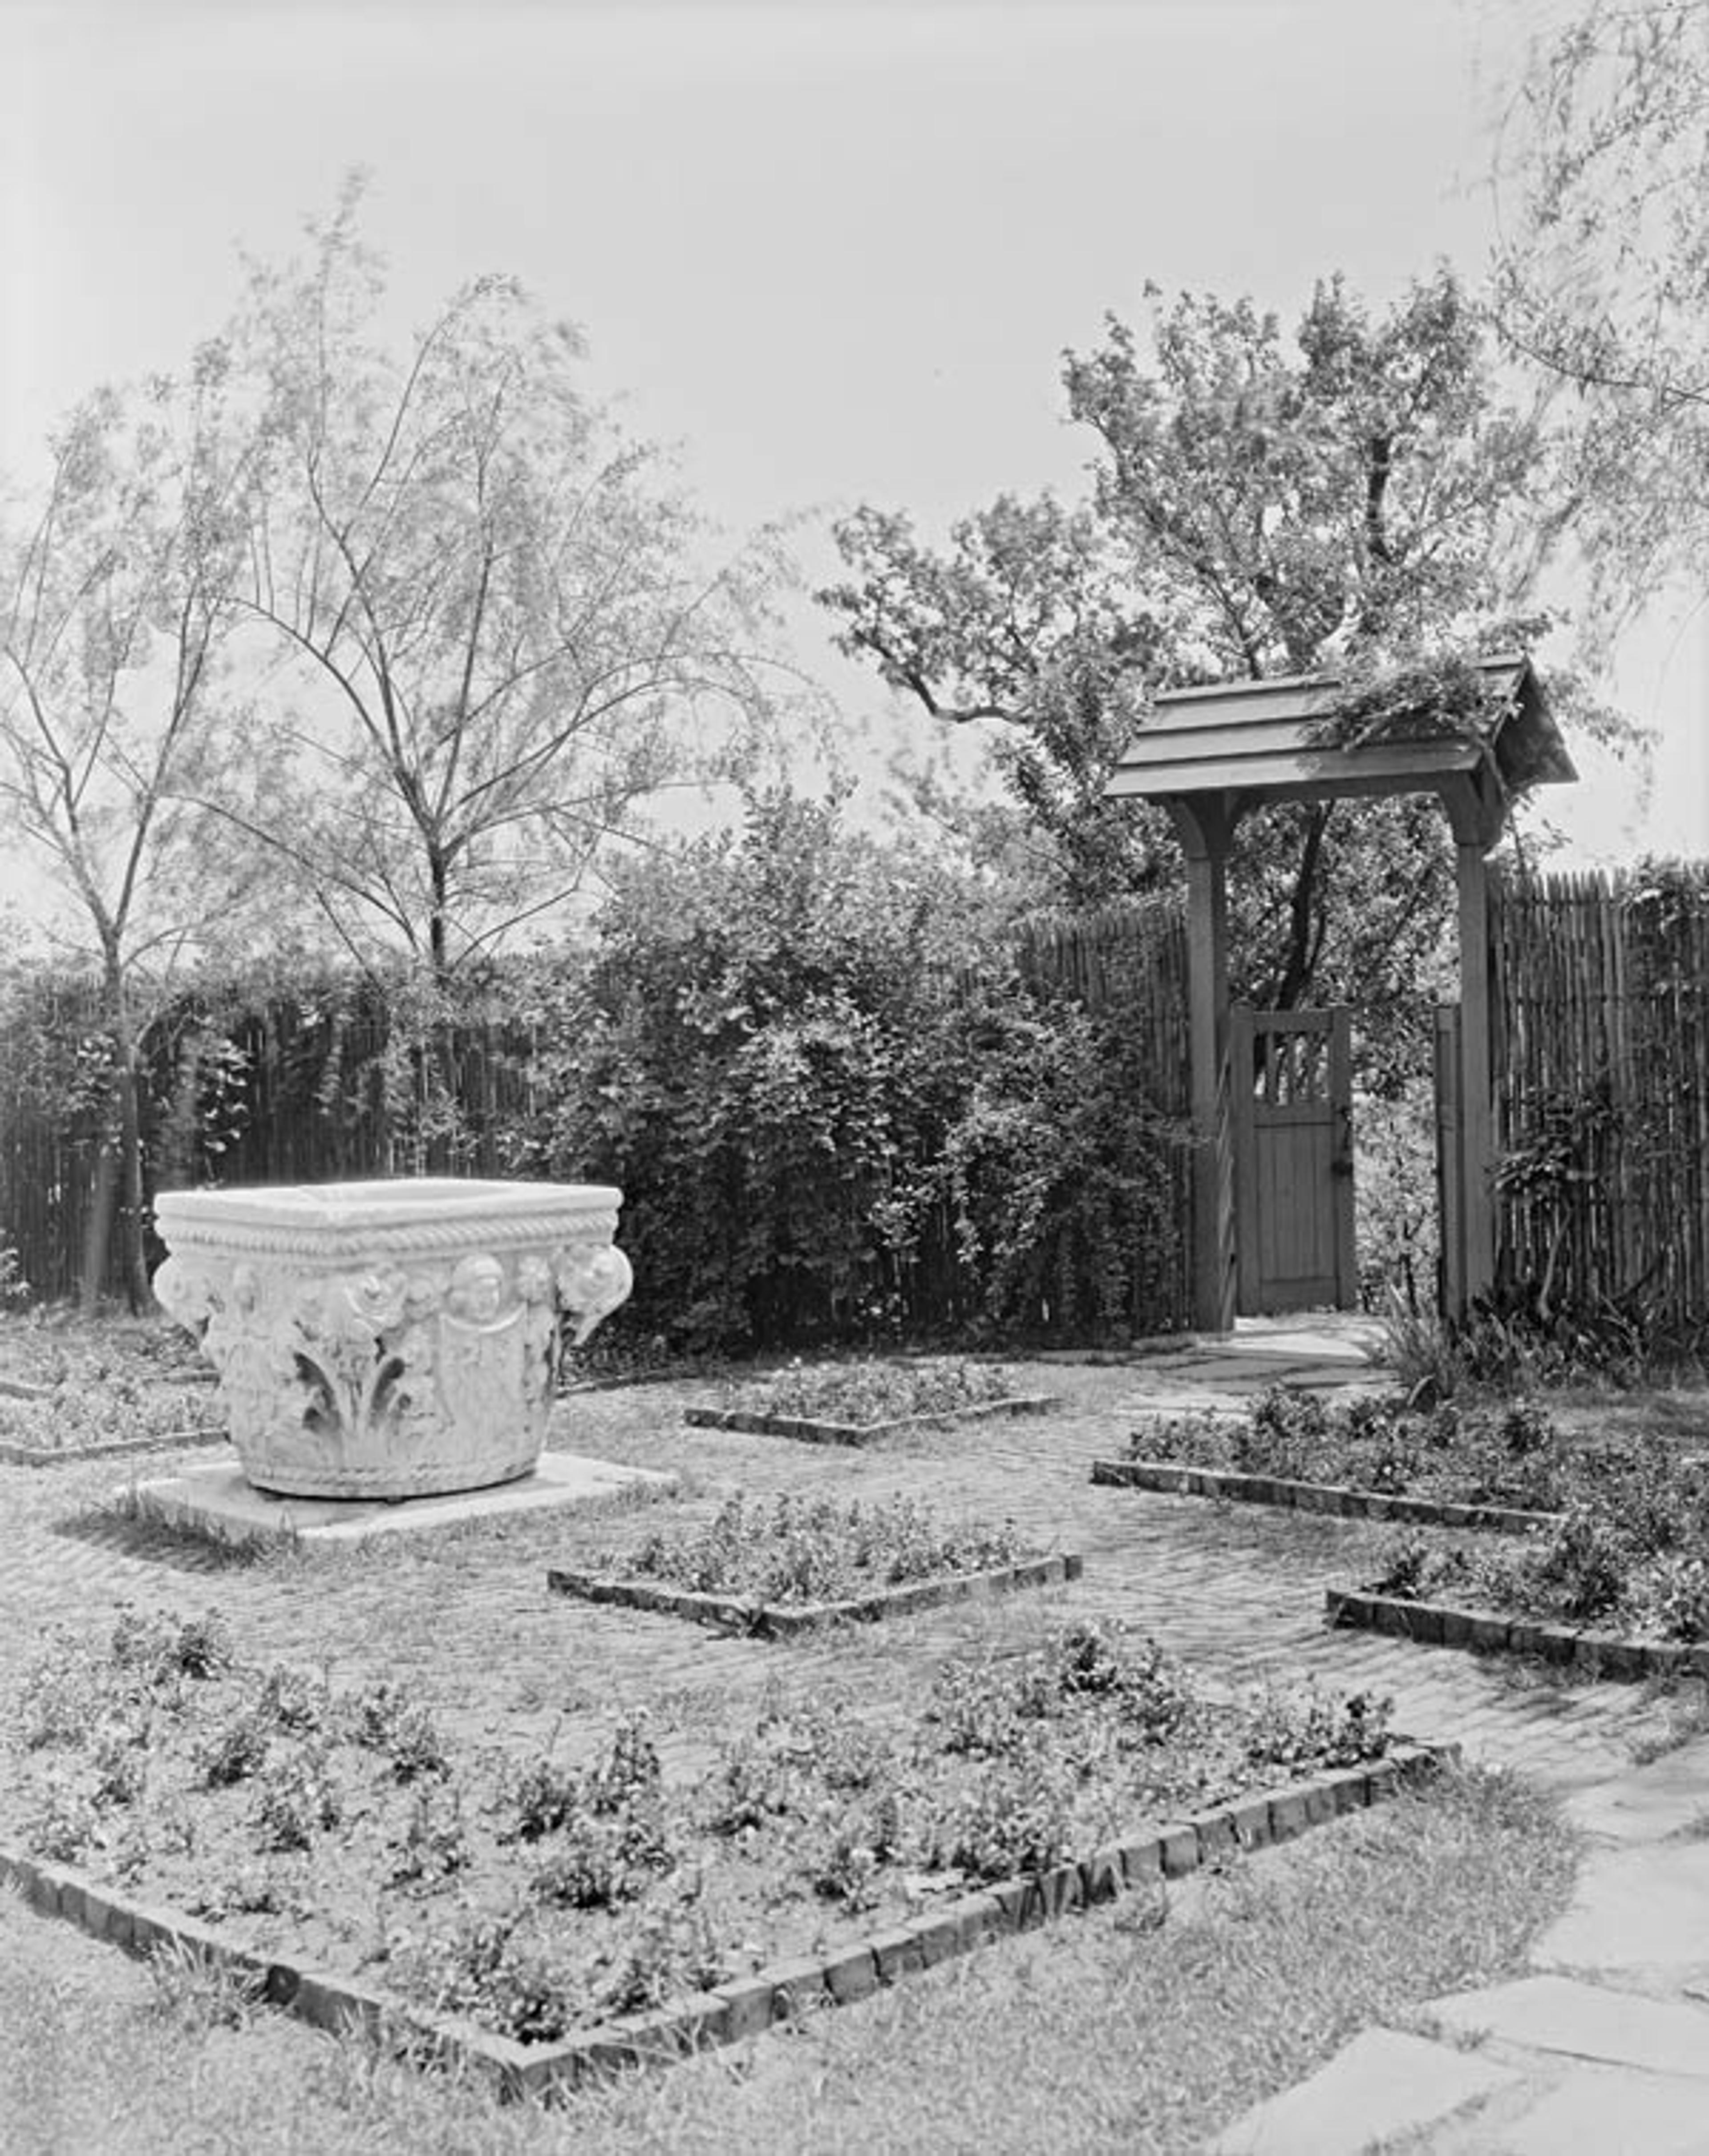 Garden designed by Breck at the southeast corner of the old Cloisters site, 1927. © The Metropolitan Museum of Art.